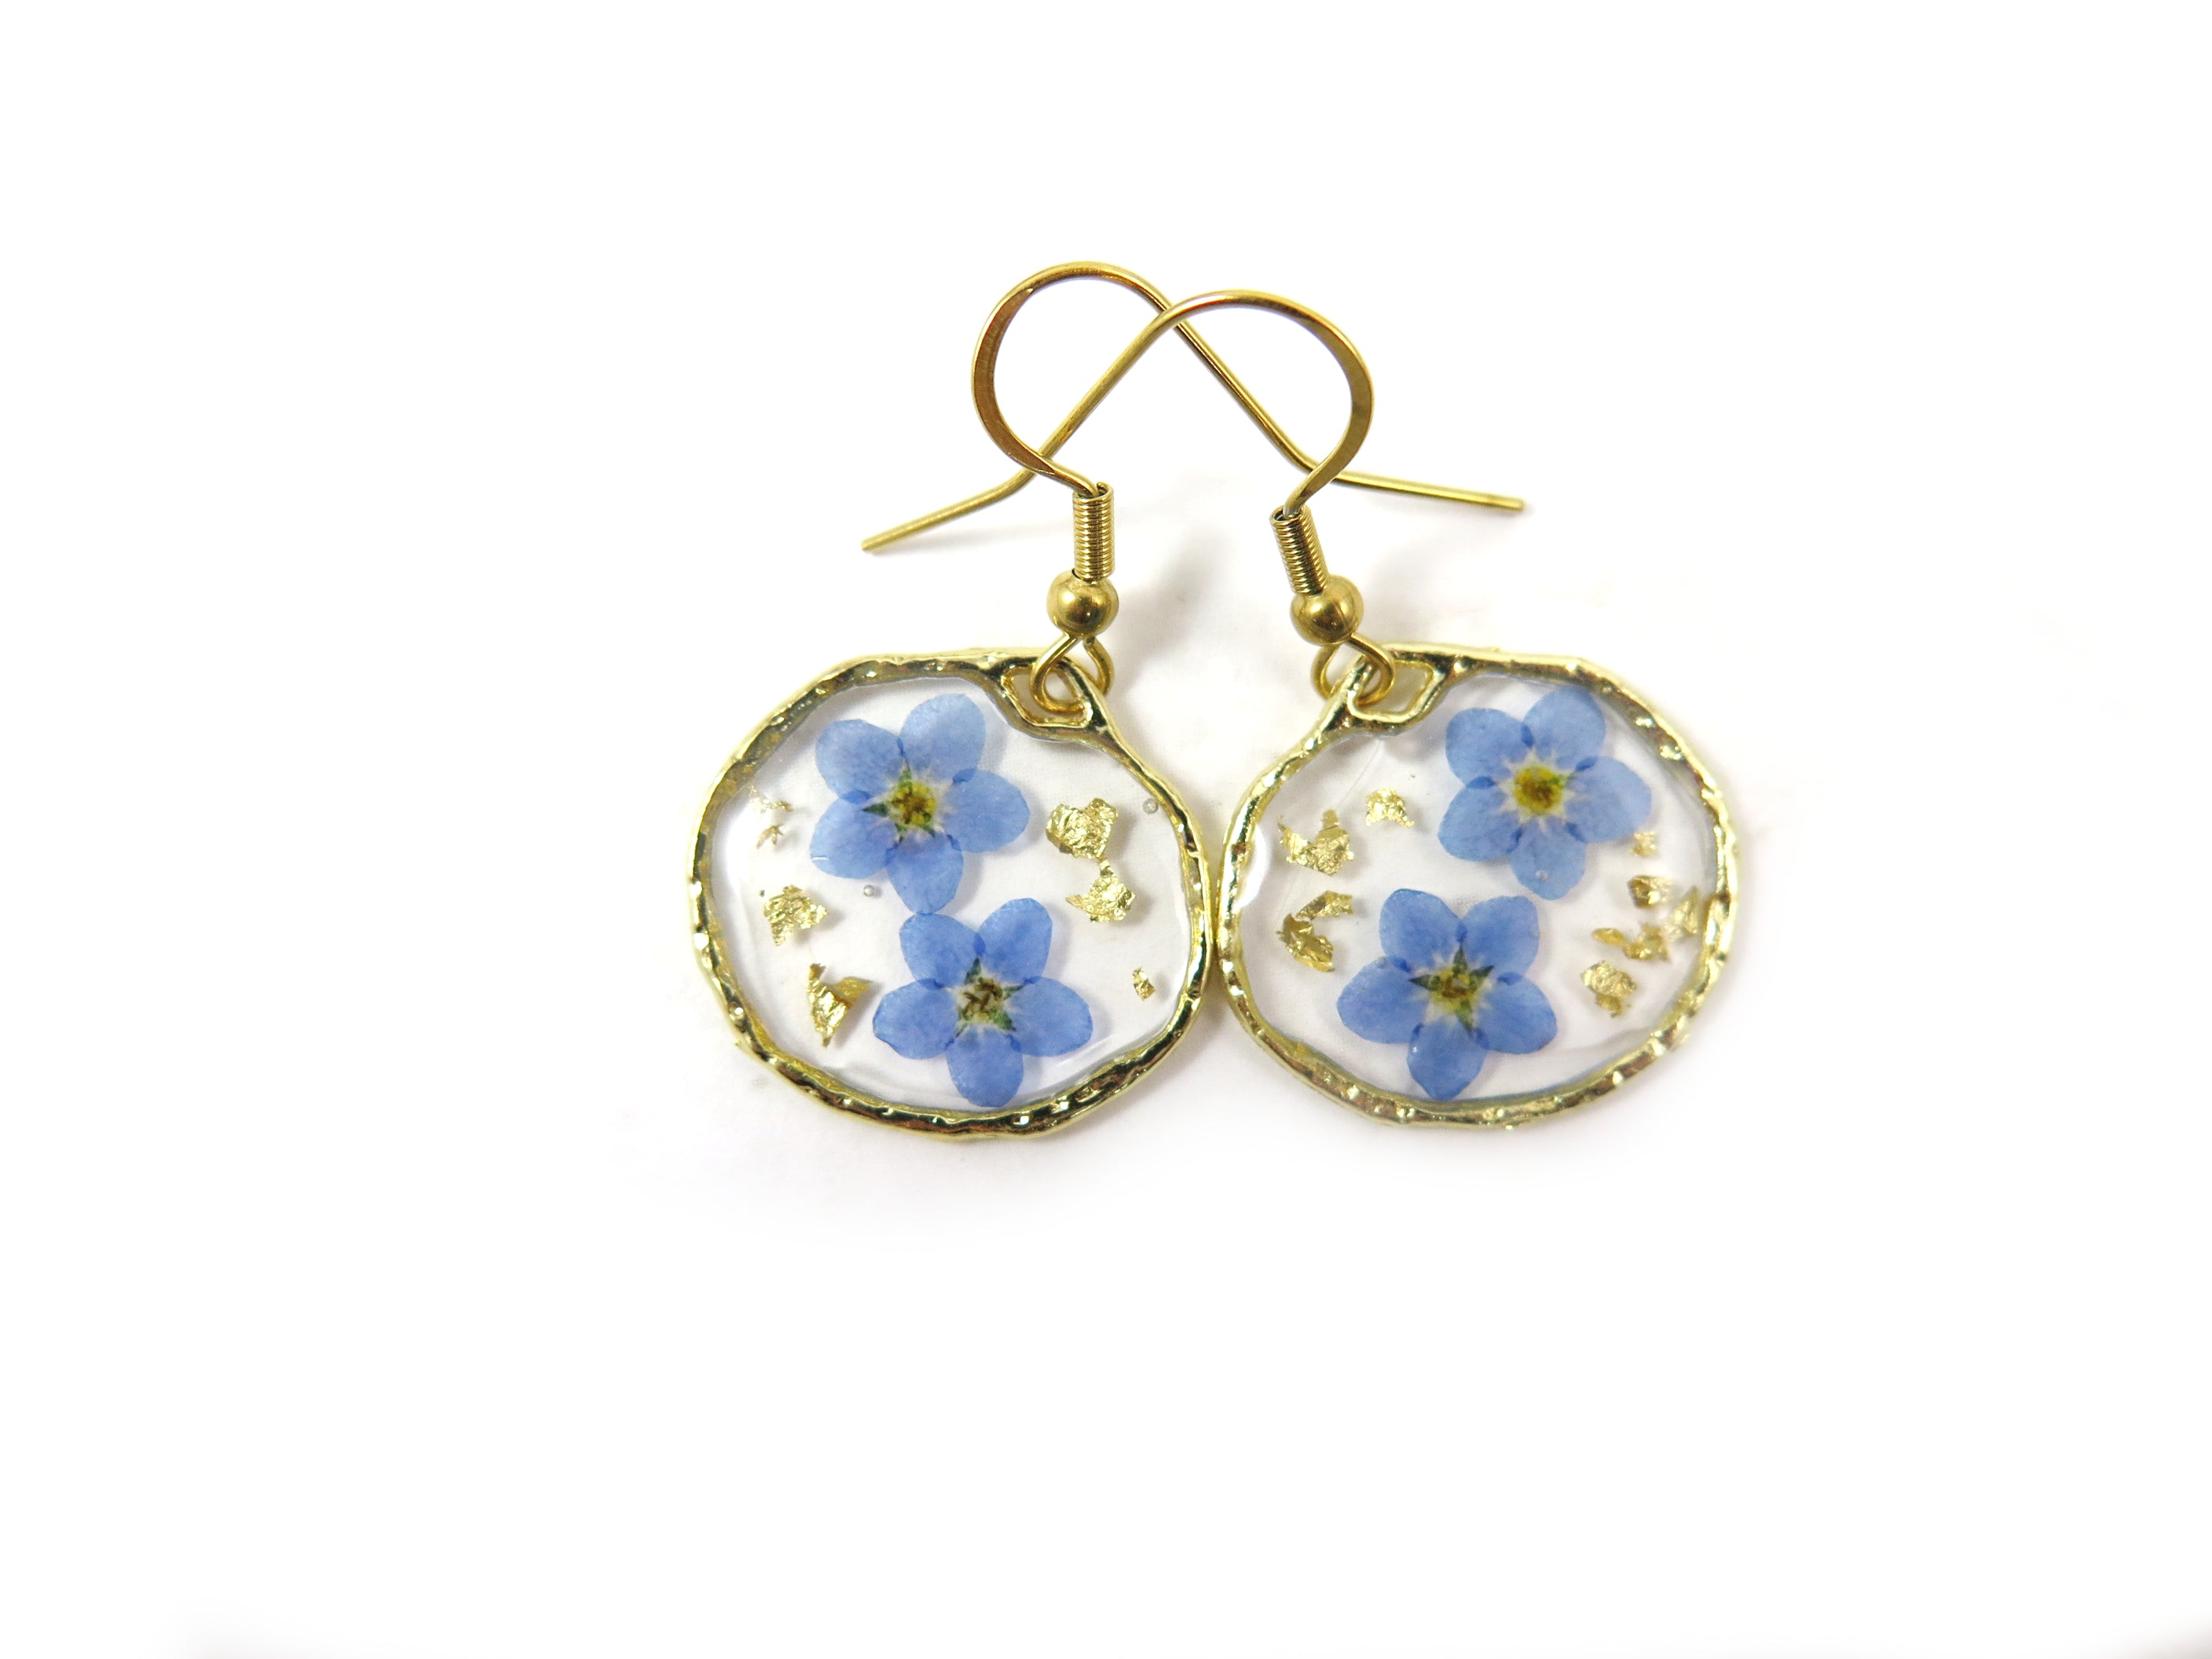 Forget me not earrings dried flowers circle earrings – Smile with